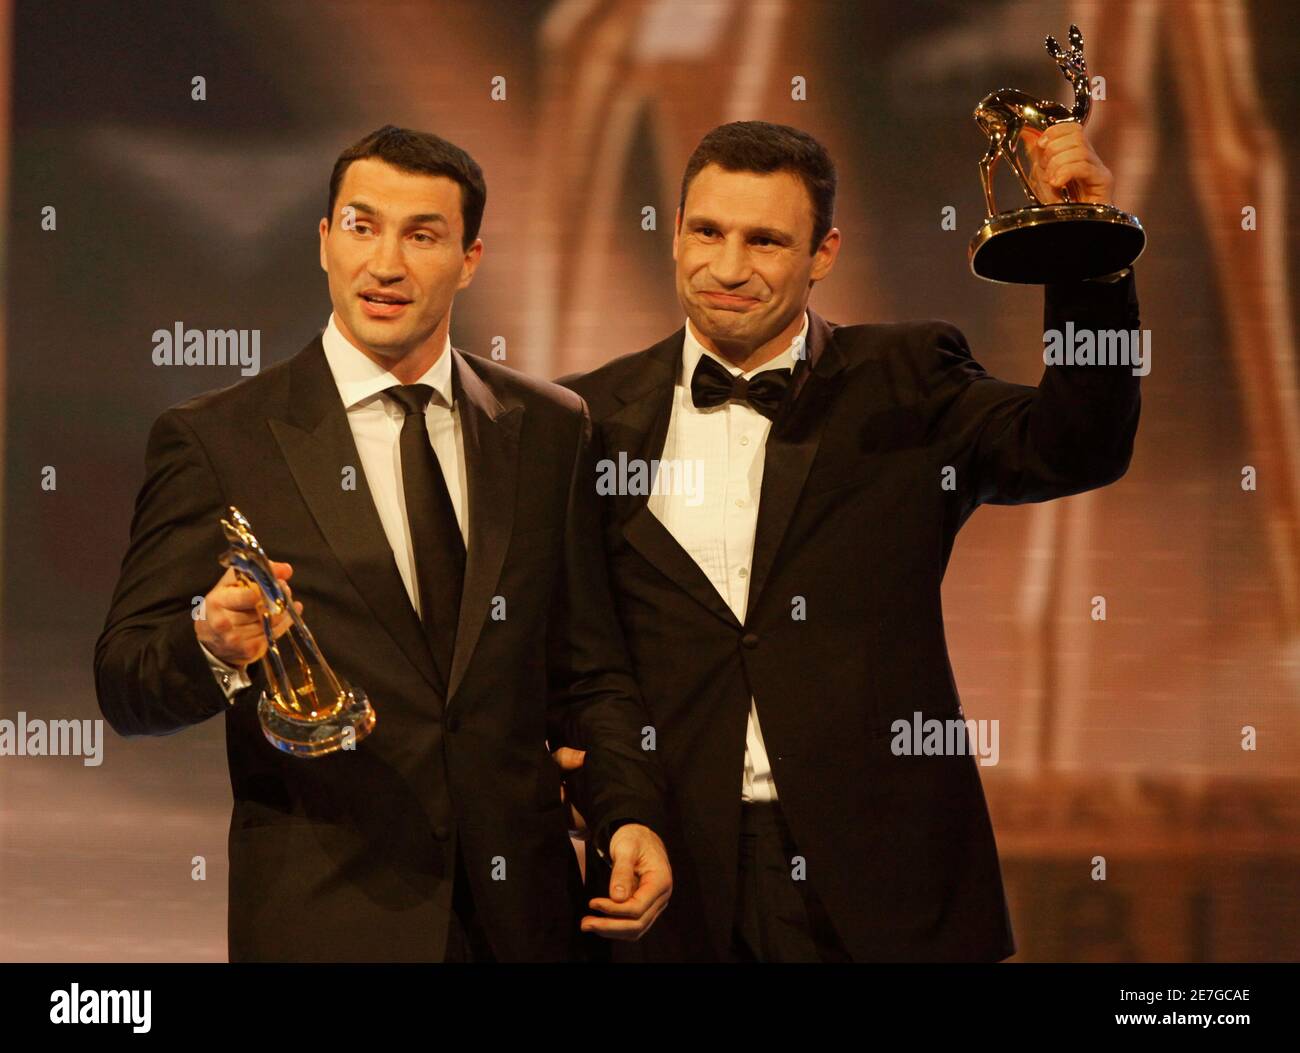 Boxers Wladimir (L) and Vitali Klitschko of Ukraine hold up their Bambi Sportliche Leistung (sporting achievement) awards during the 61st Bambi media awards ceremony in Potsdam November 26, 2009. Each year, German media company 'Hubert Burda Media', honours celebrities from the world of entertainment, literature, sports and politics with the Bambi awards. REUTERS/Tobias Schwarz (GERMANY) Stock Photo